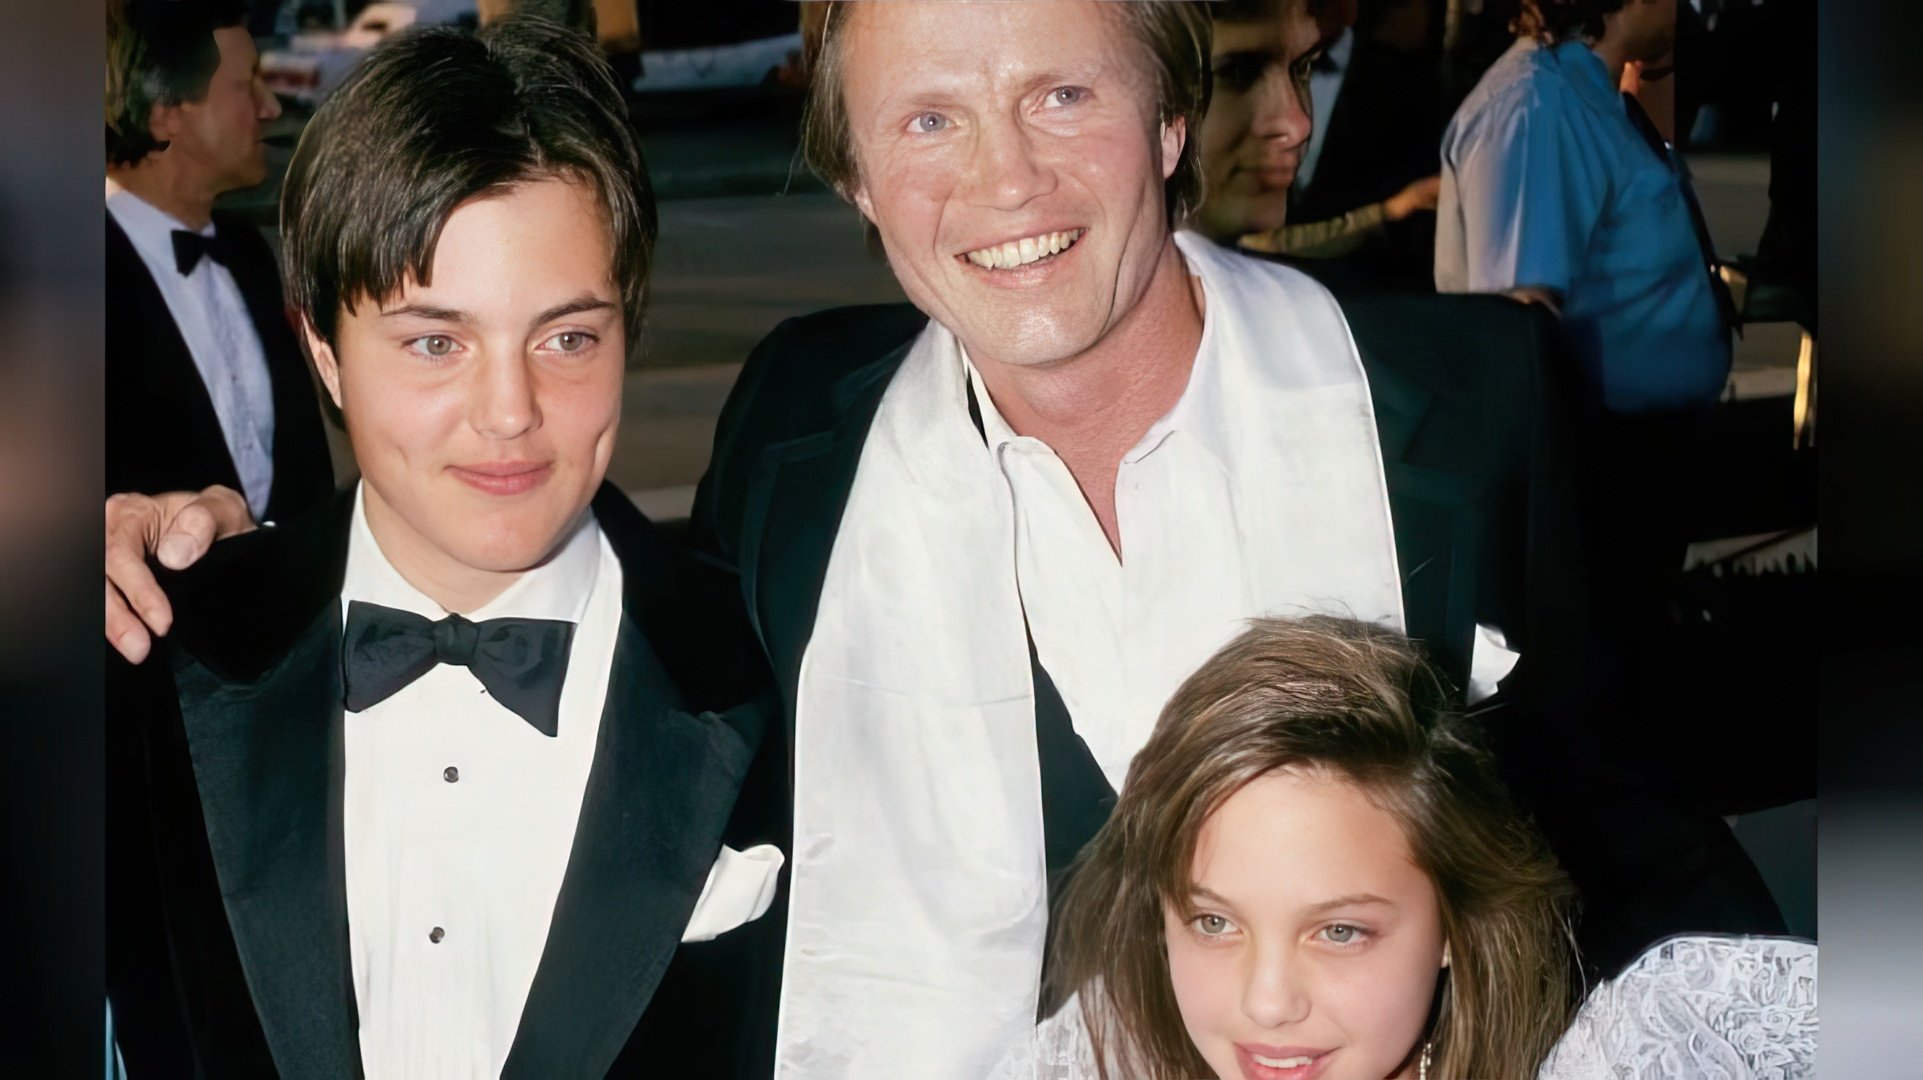 Jon Voight's children got used to cameras from an early age